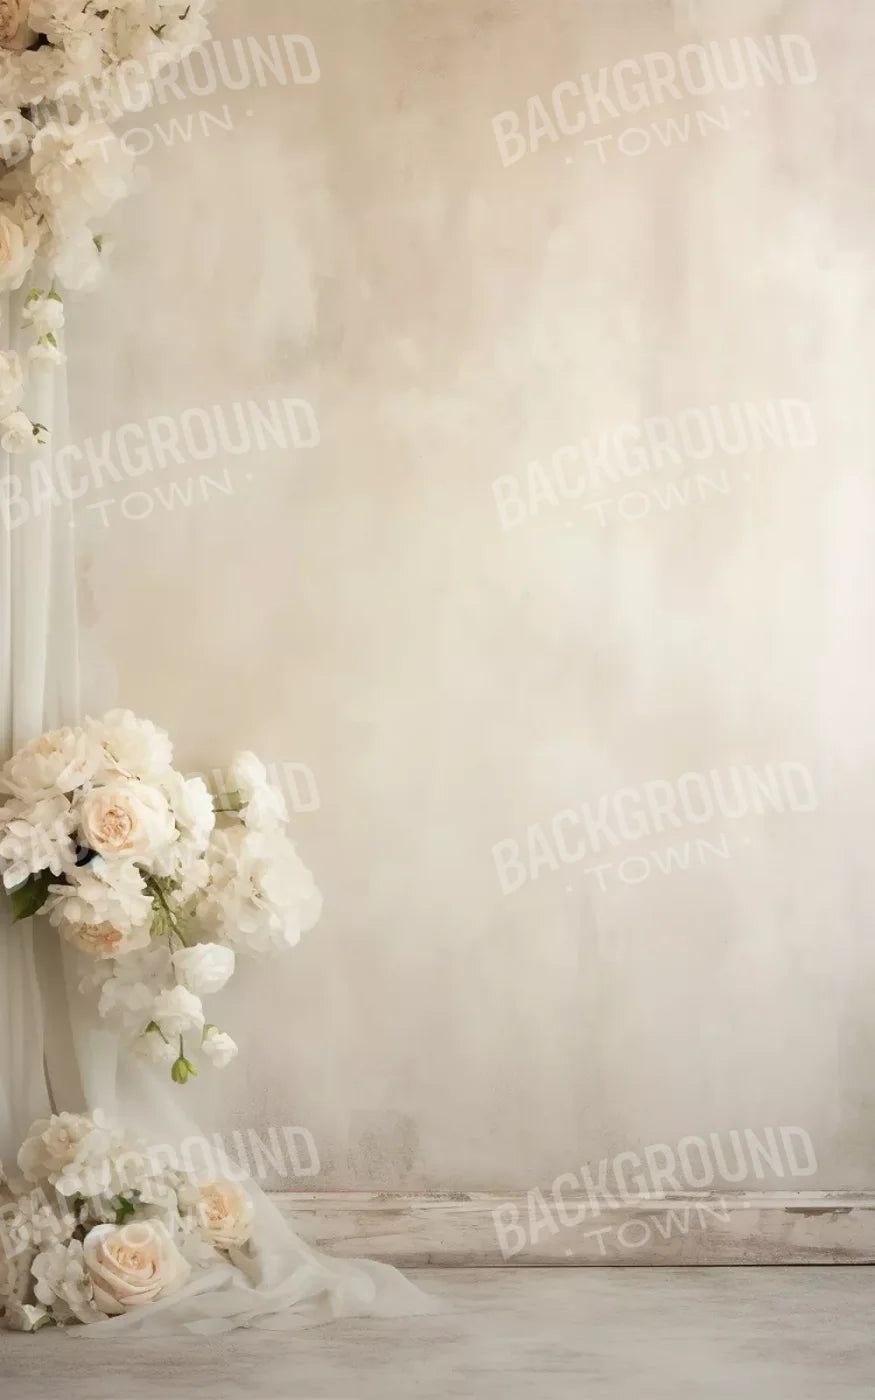 Plaster Wall With Florals 5’X8’ Ultracloth (60 X 96 Inch) Backdrop